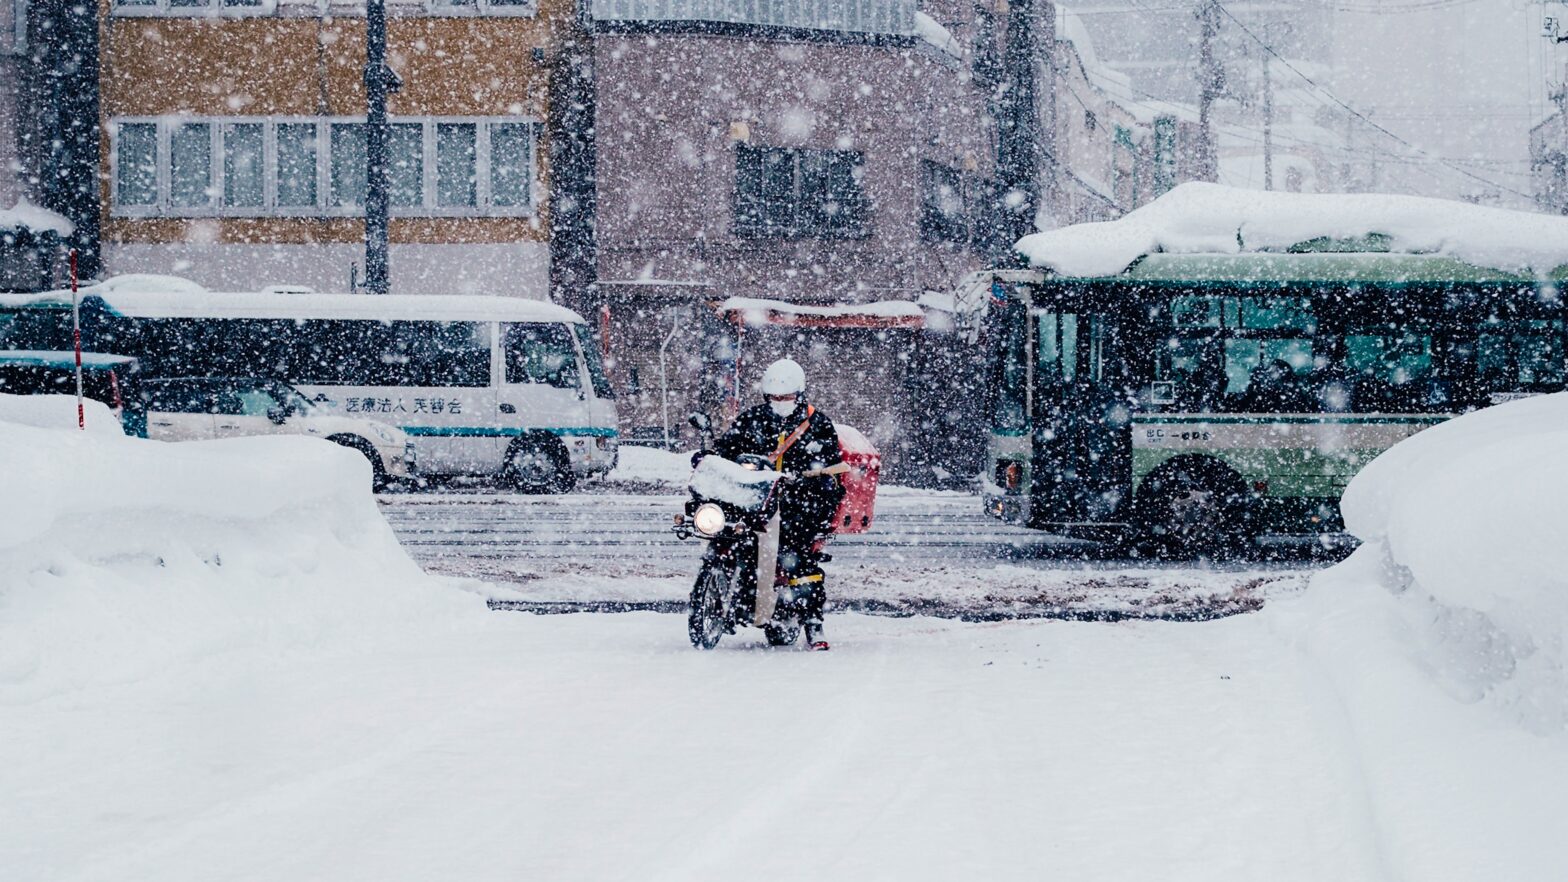 Riding a motorcycle in winter – useful tips